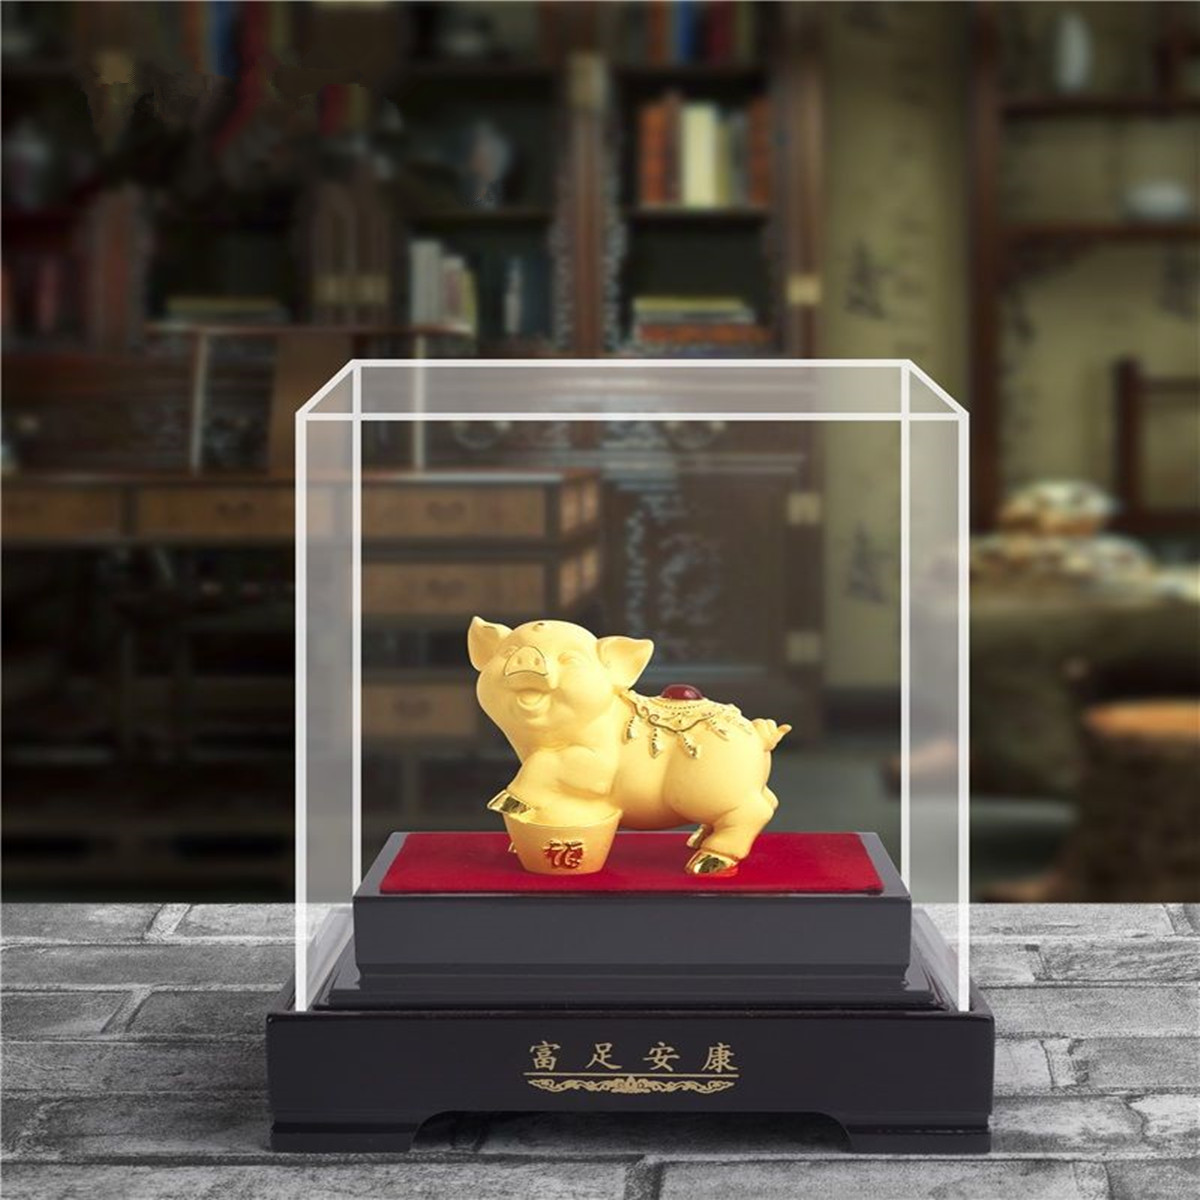 2019-Chinese-Zodiac-Gold-Pig-Money-Wealth-Statue-Office-Home-Decorations-Ornament-Gift-1515810-4